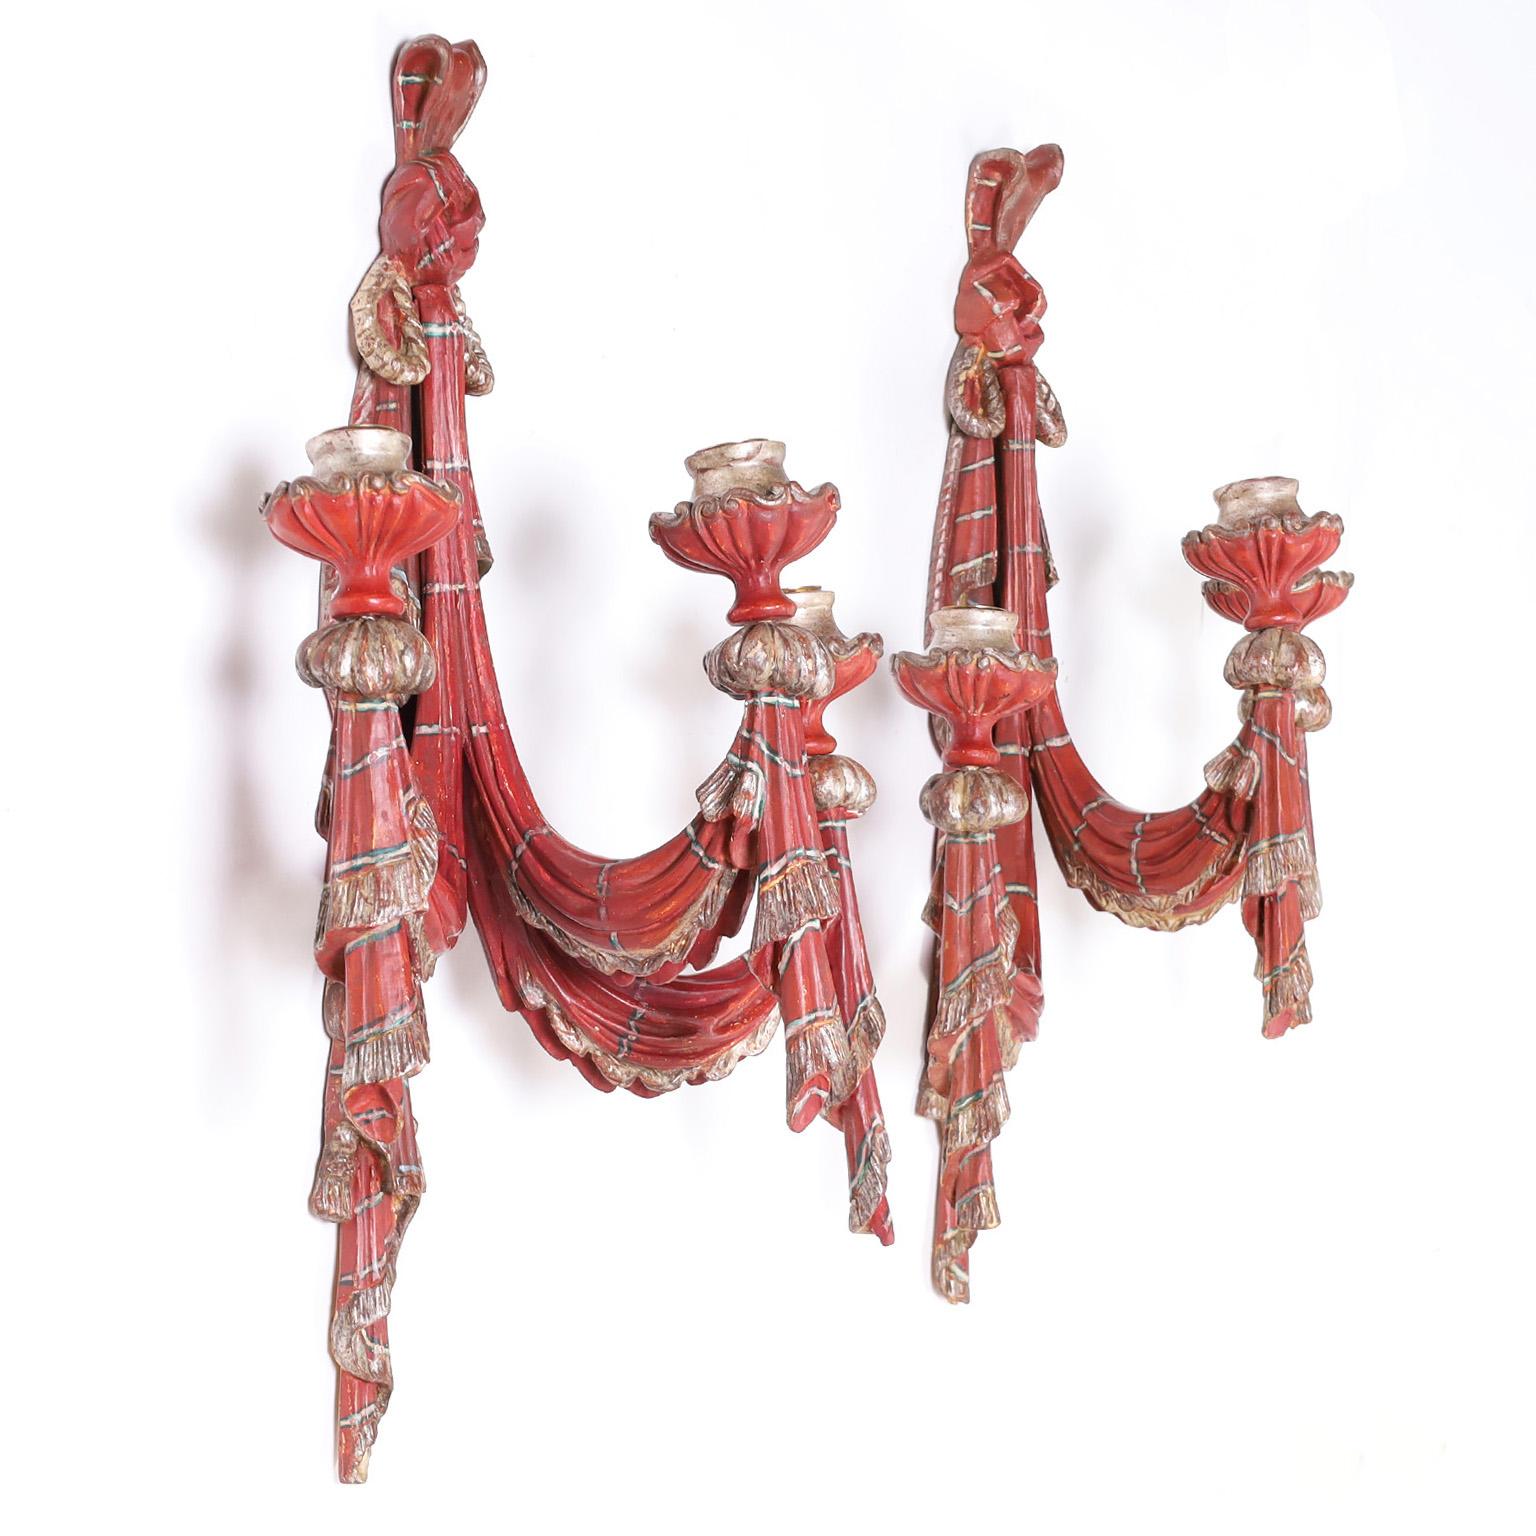 Antique pair of Venetian style three light Italian wall sconces carved from hardwood in an elegant faux drapery composition decorated with an alluring red. Highlighted with silver leaf rope and tassel, all worn to perfection.